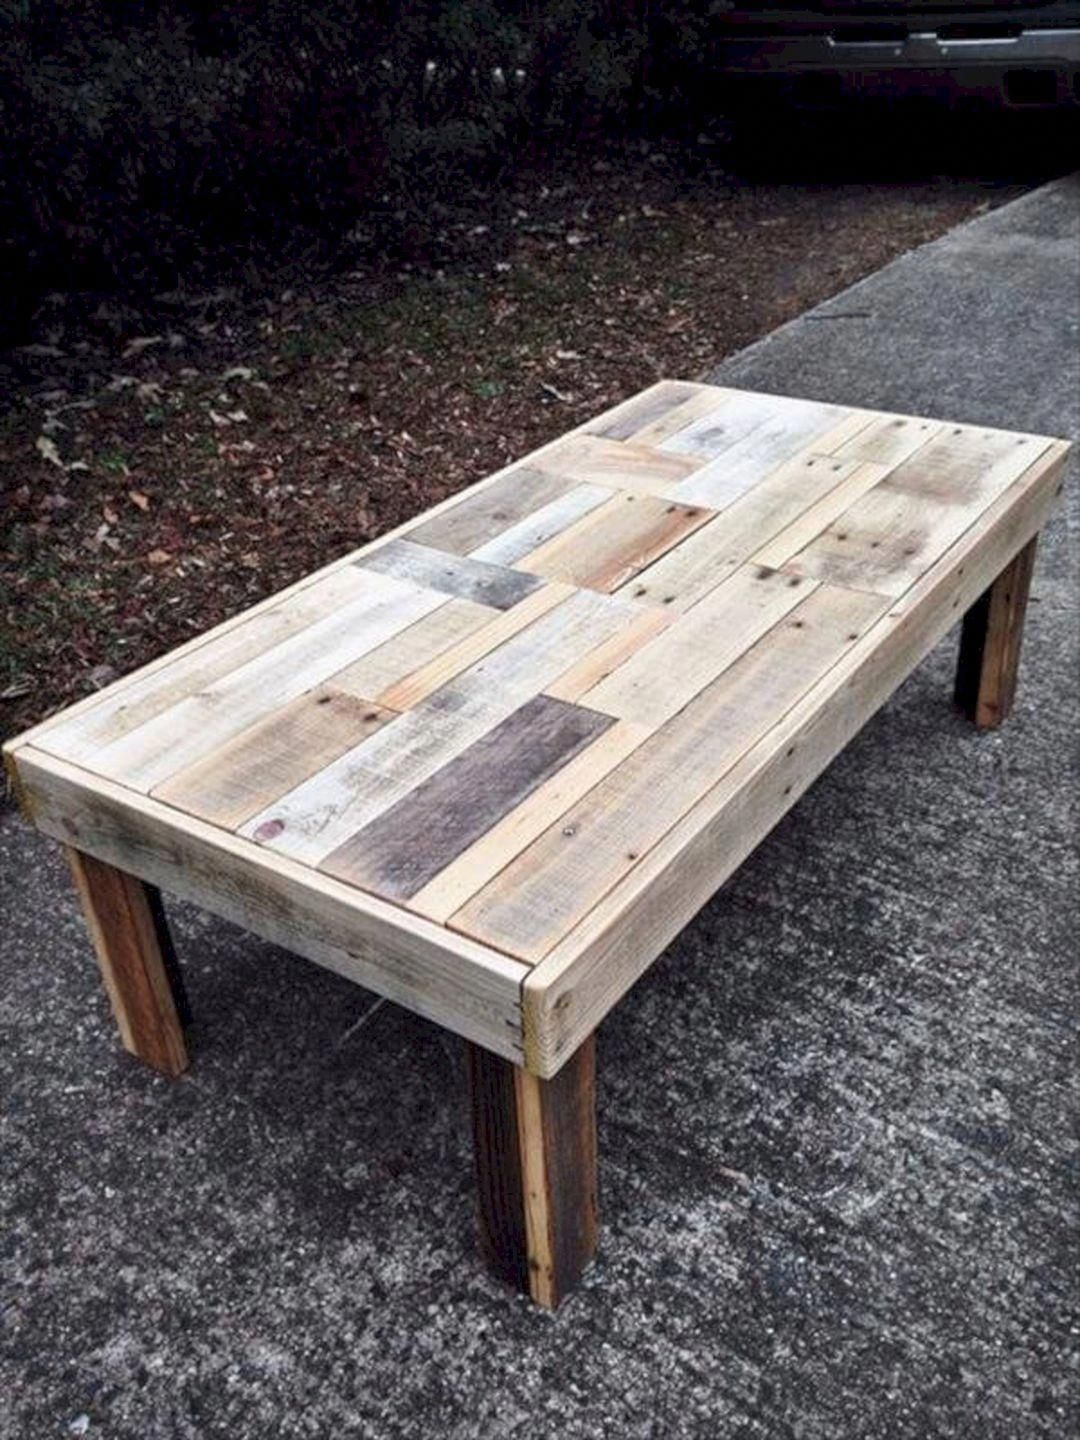 This is a table i would use this to put